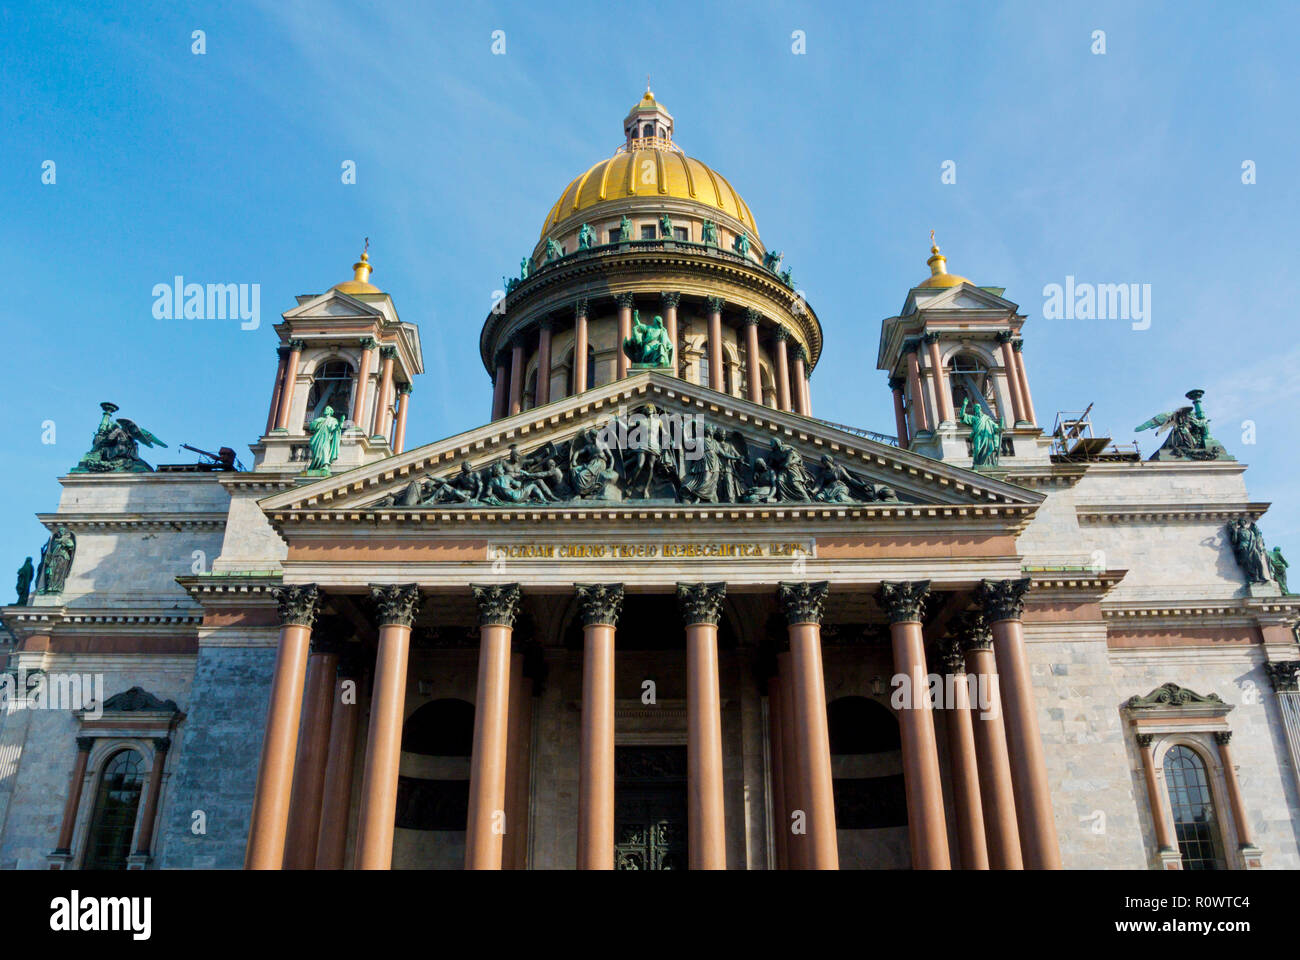 St Isaac's Cathedral, Saint Petersburg, Russia Stock Photo